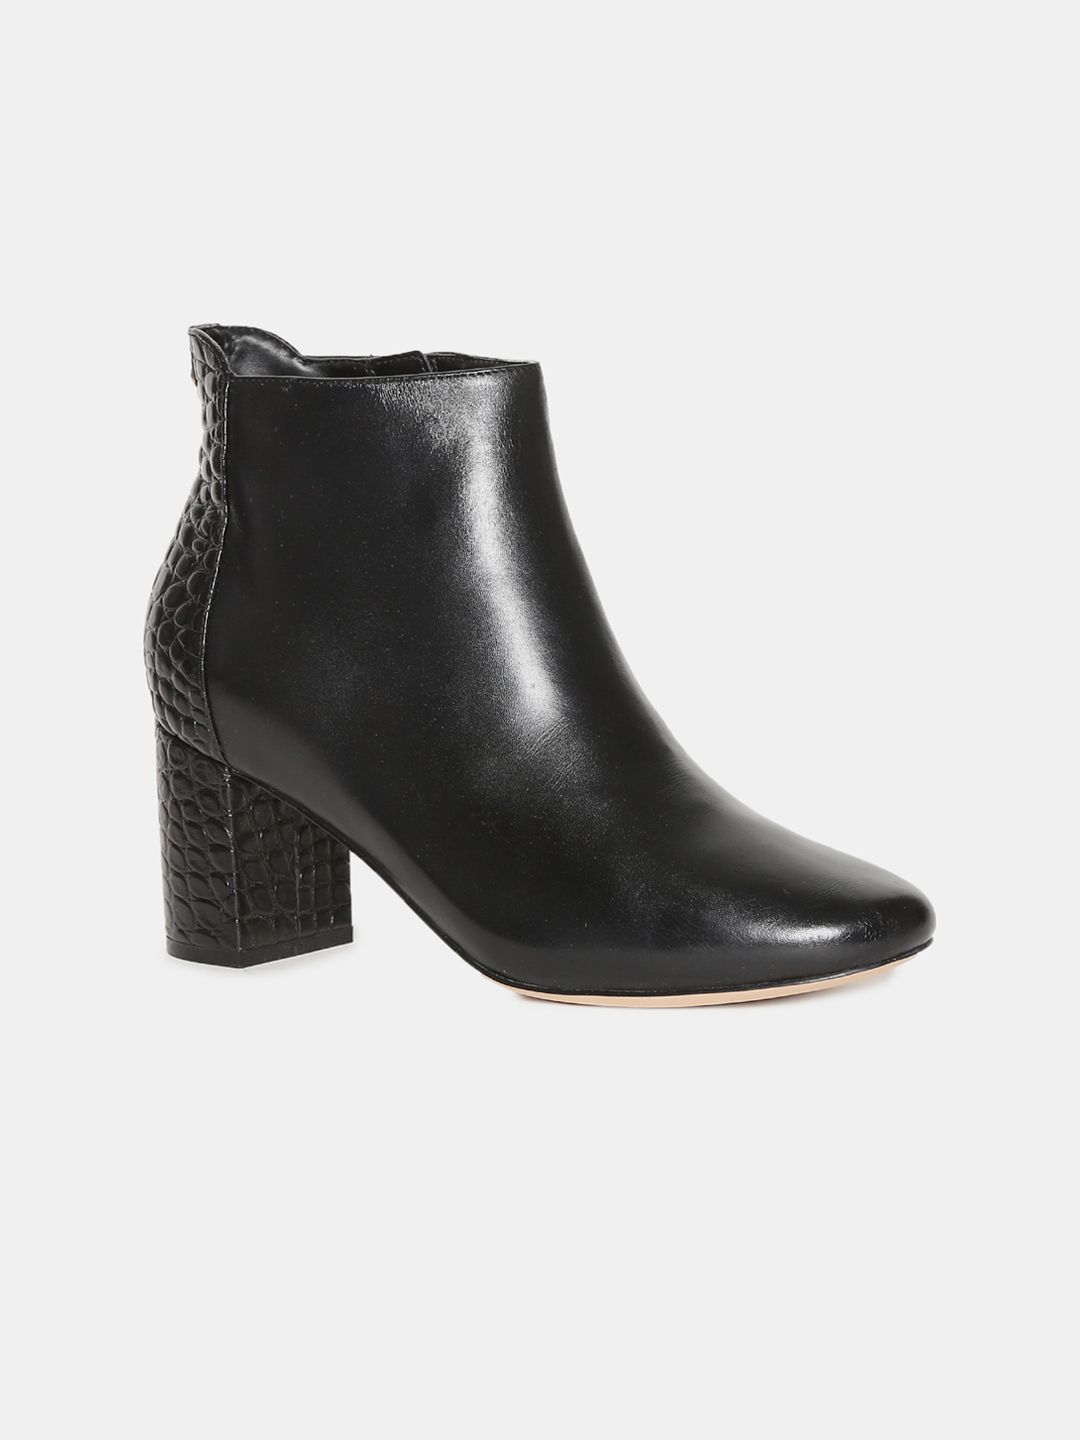 Cole Haan Women Black Solid Leather Block Heeled Boots Price in India